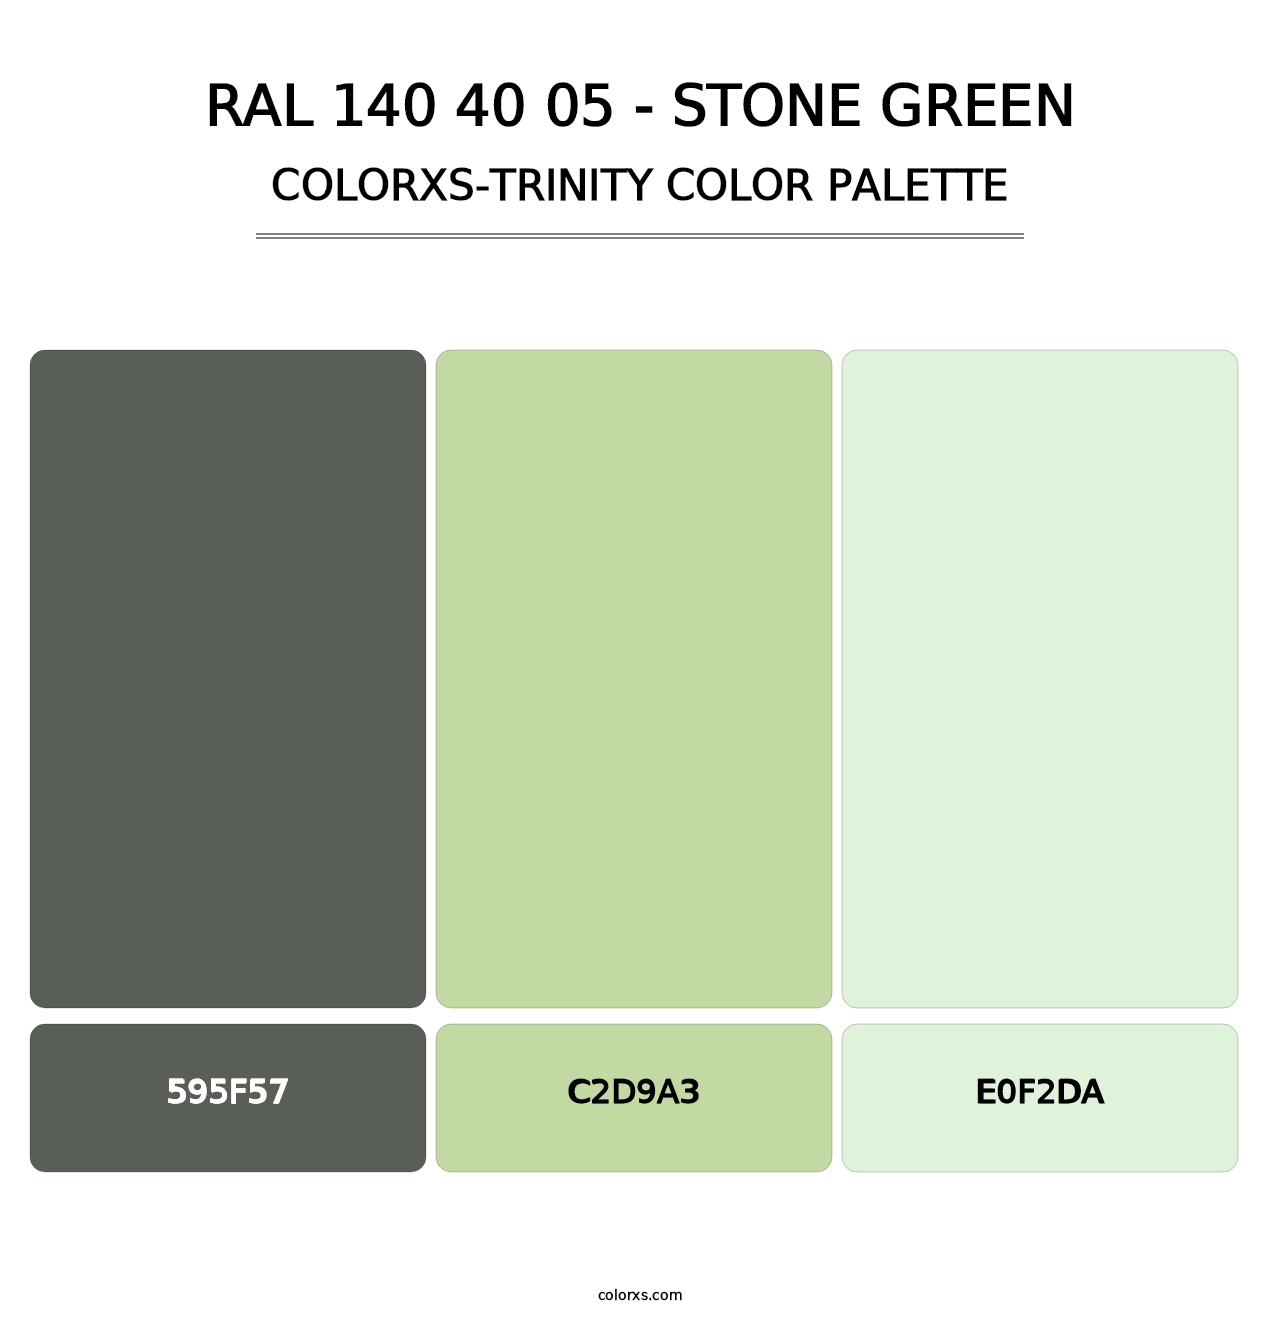 RAL 140 40 05 - Stone Green - Colorxs Trinity Palette